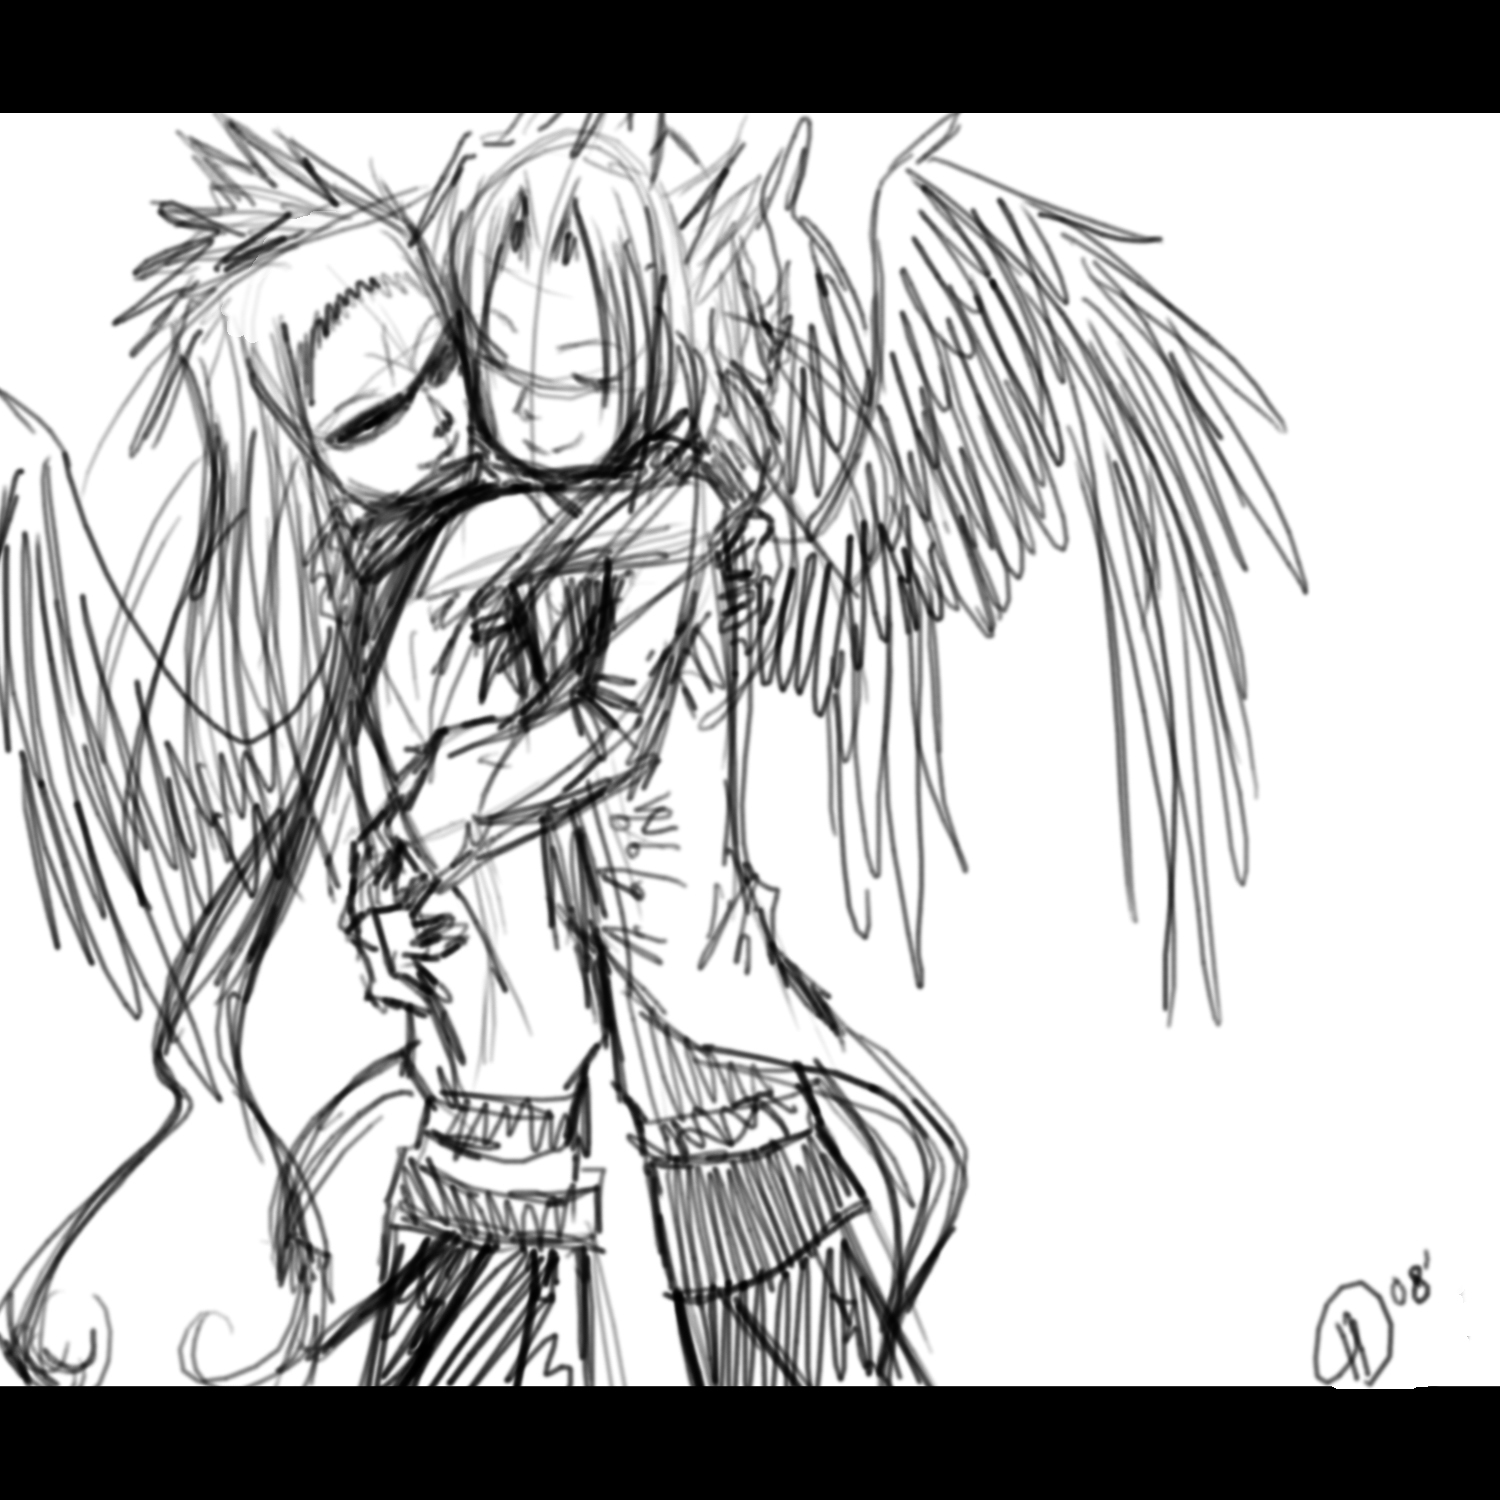 XEMNAS AND SAIX SKETCH by Heathere